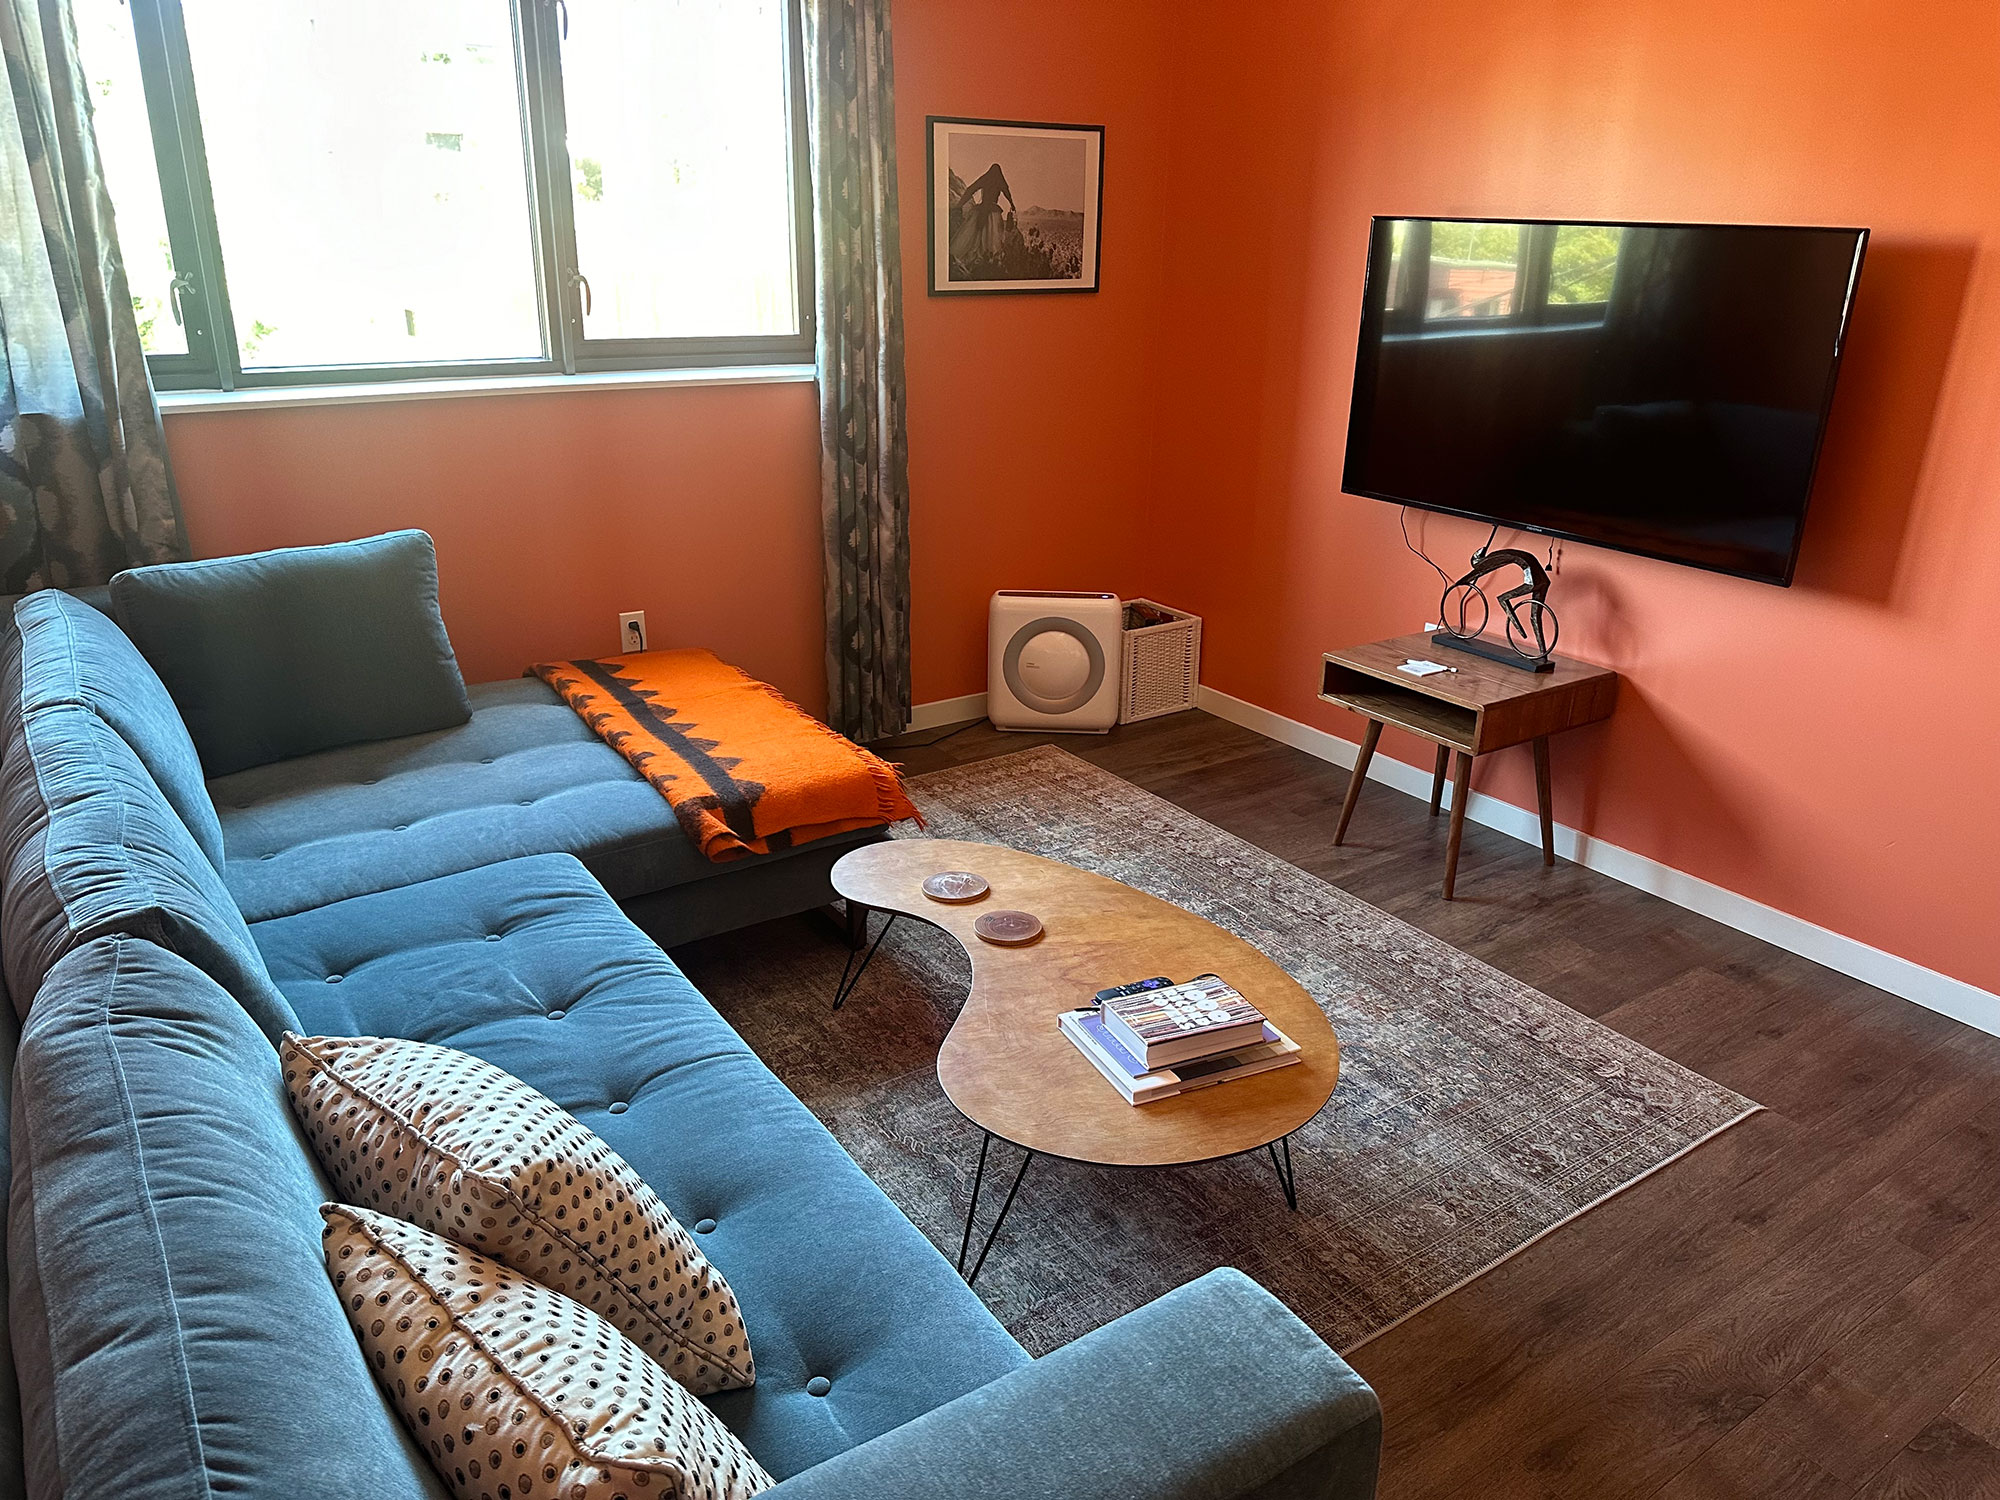 Chinook Suite 203 Living Room with orange walls, a tv on the wall, and furniture throughout